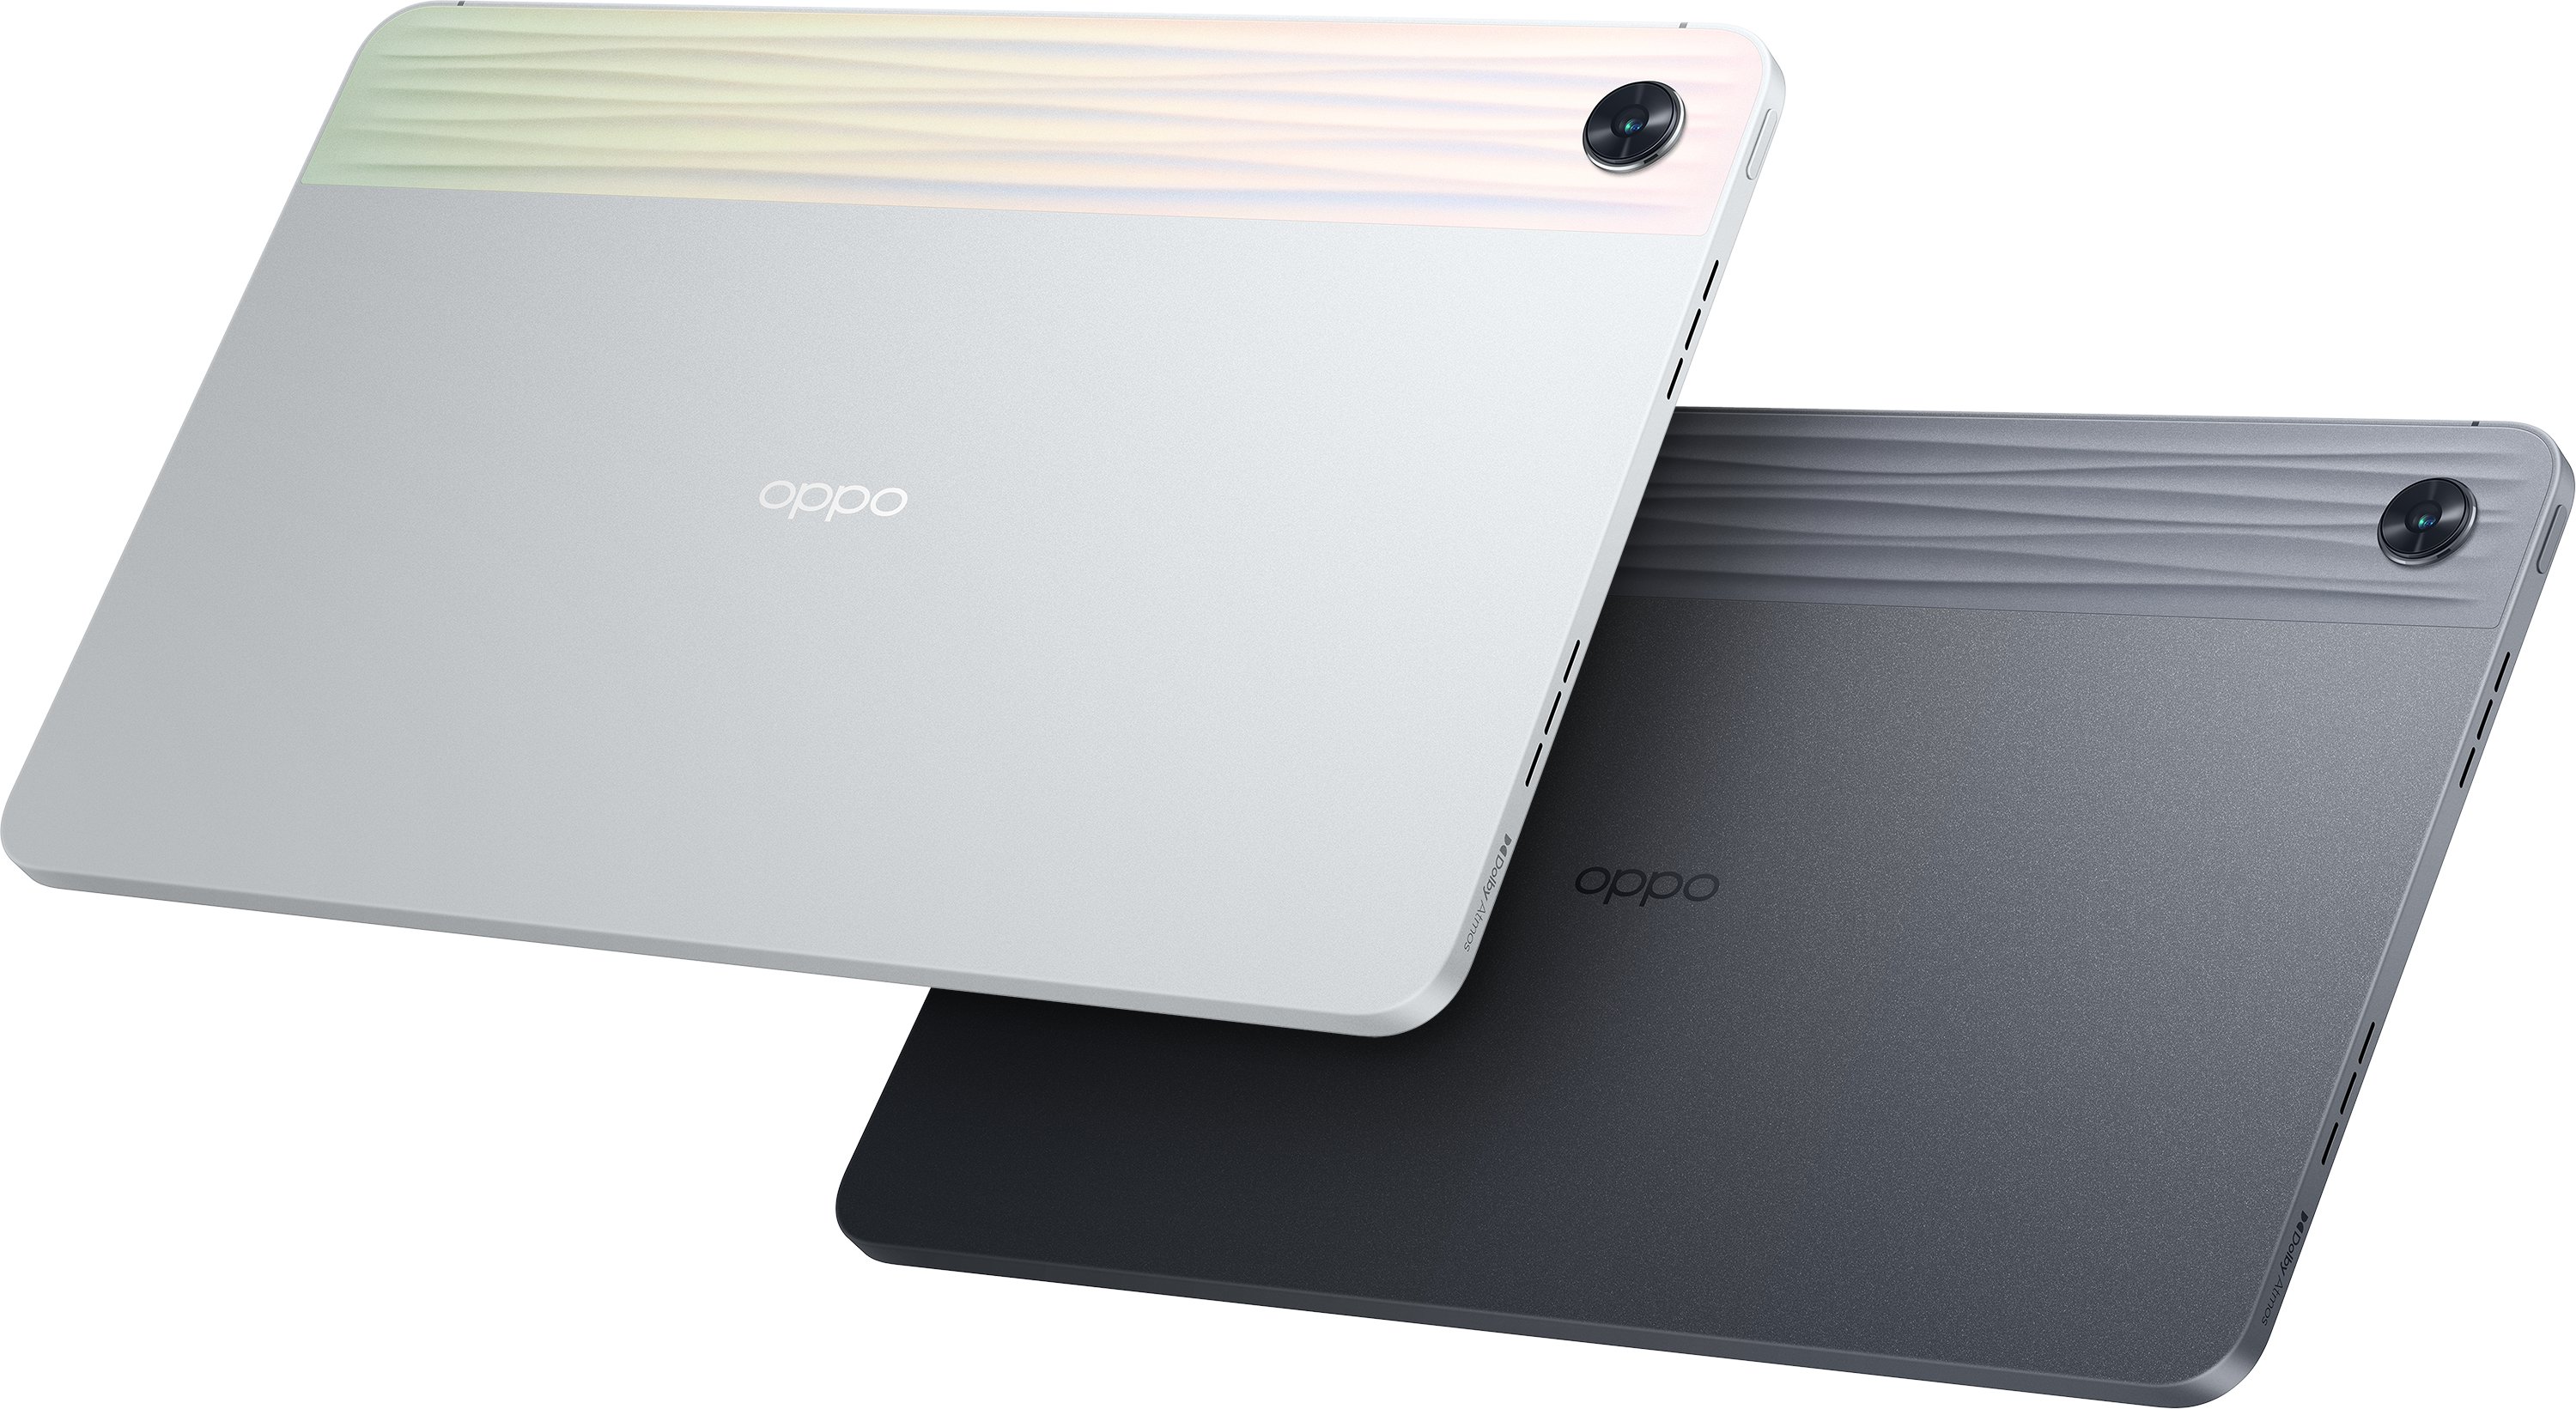 An insider showed what the OPPO Pad Air tablet will look like with